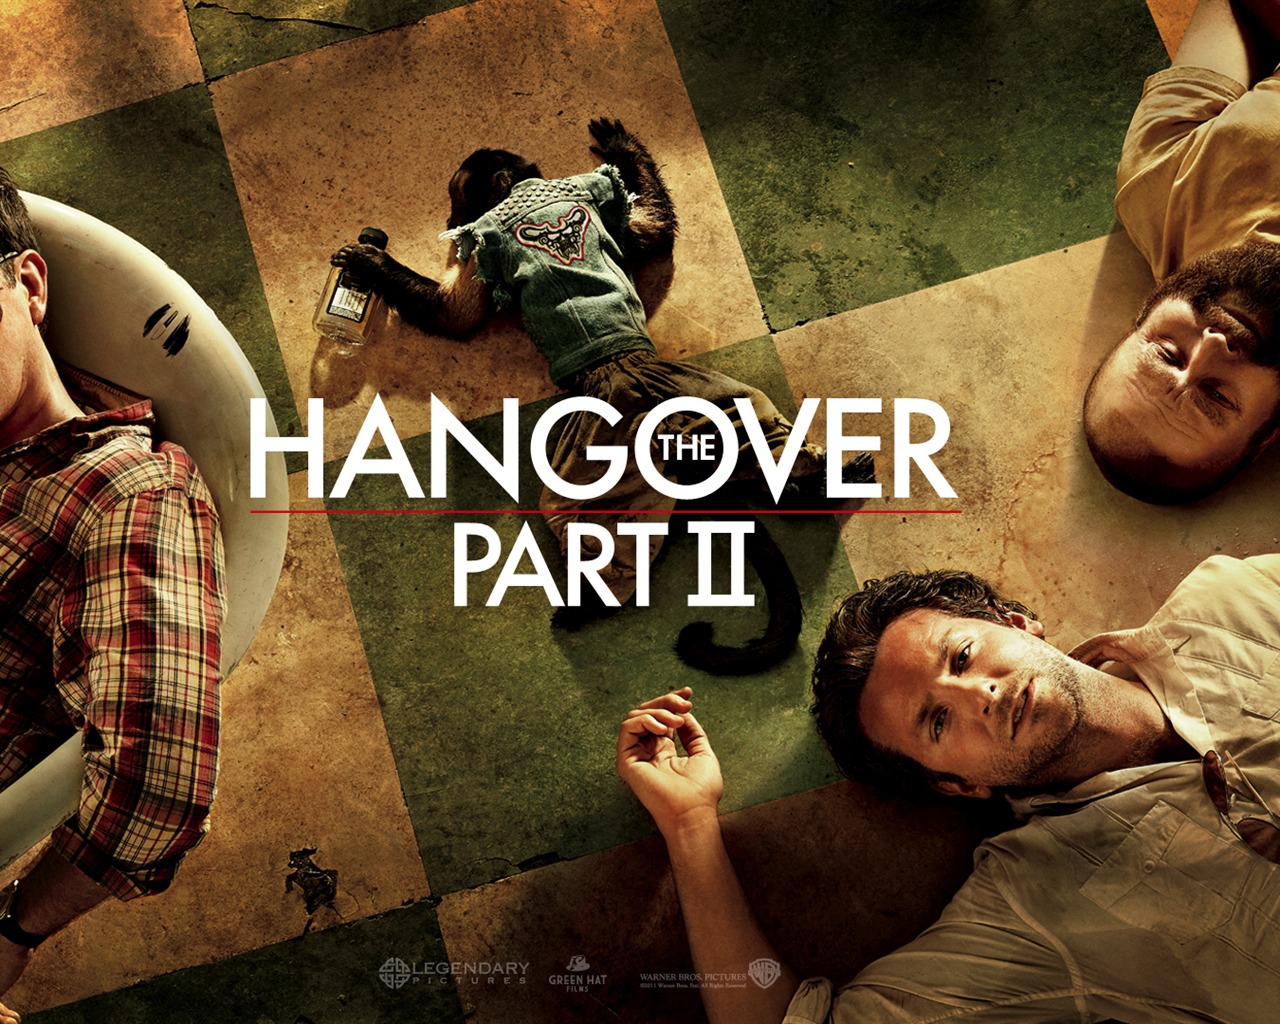 The Hangover část II tapety #1 - 1280x1024